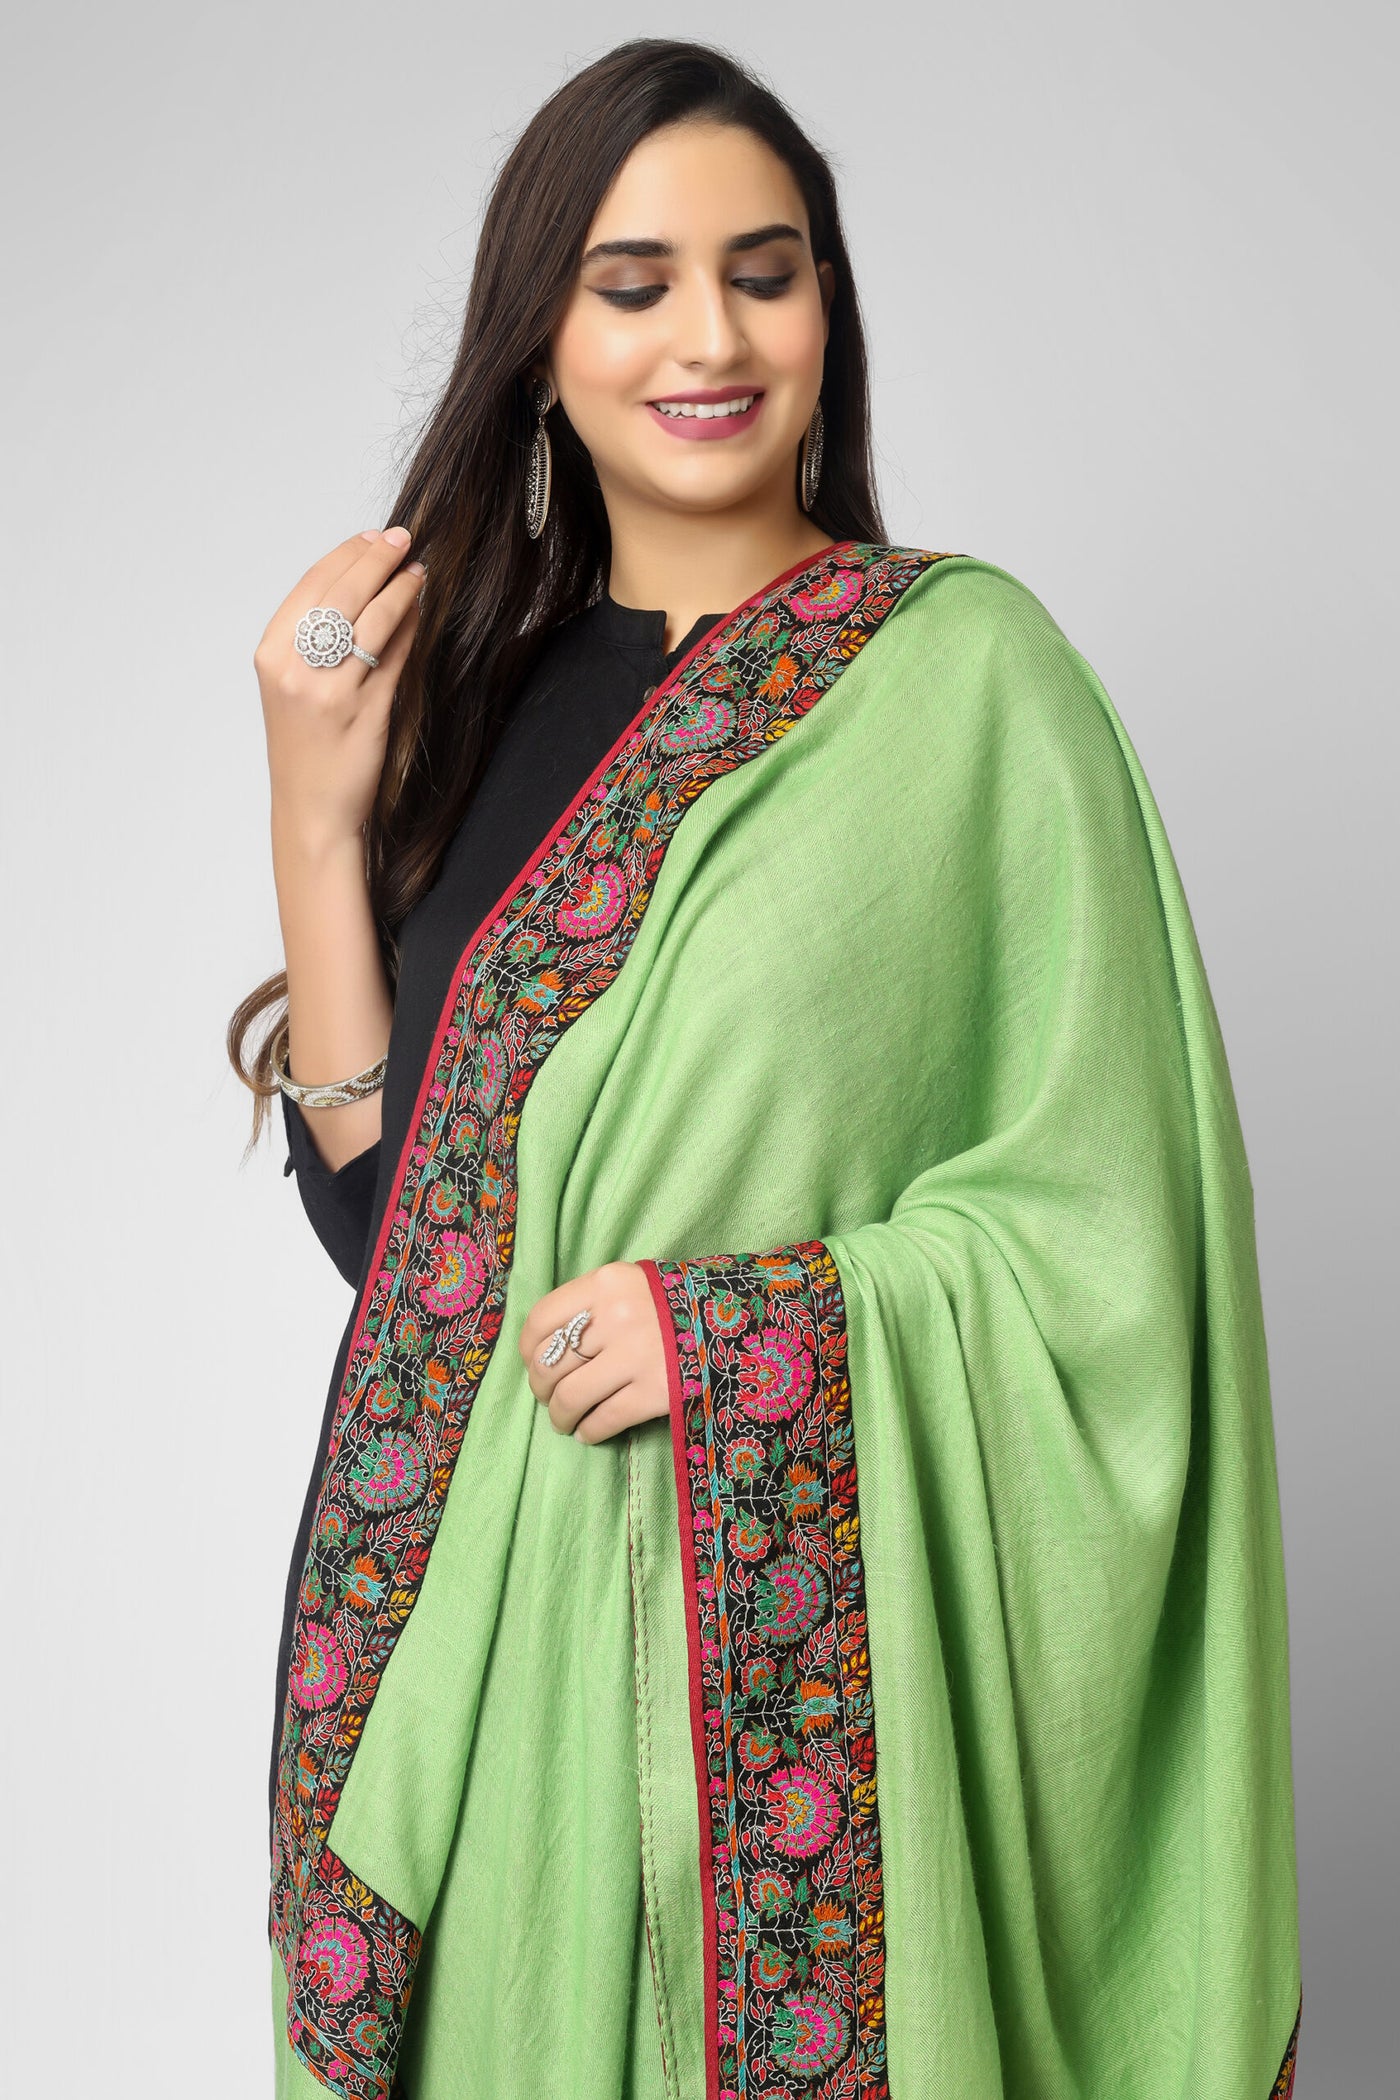  With this genuine Green Kashmiri pashmina shawl, made of the pashmina, you can swaddle yourself in luxury. It has beautiful embroidery and a lovely Doordaar design. A thick Sozni patchwork embroidered border surrounds the edges, exhibiting stunning designs created from tangled multicolor Sozni threads.